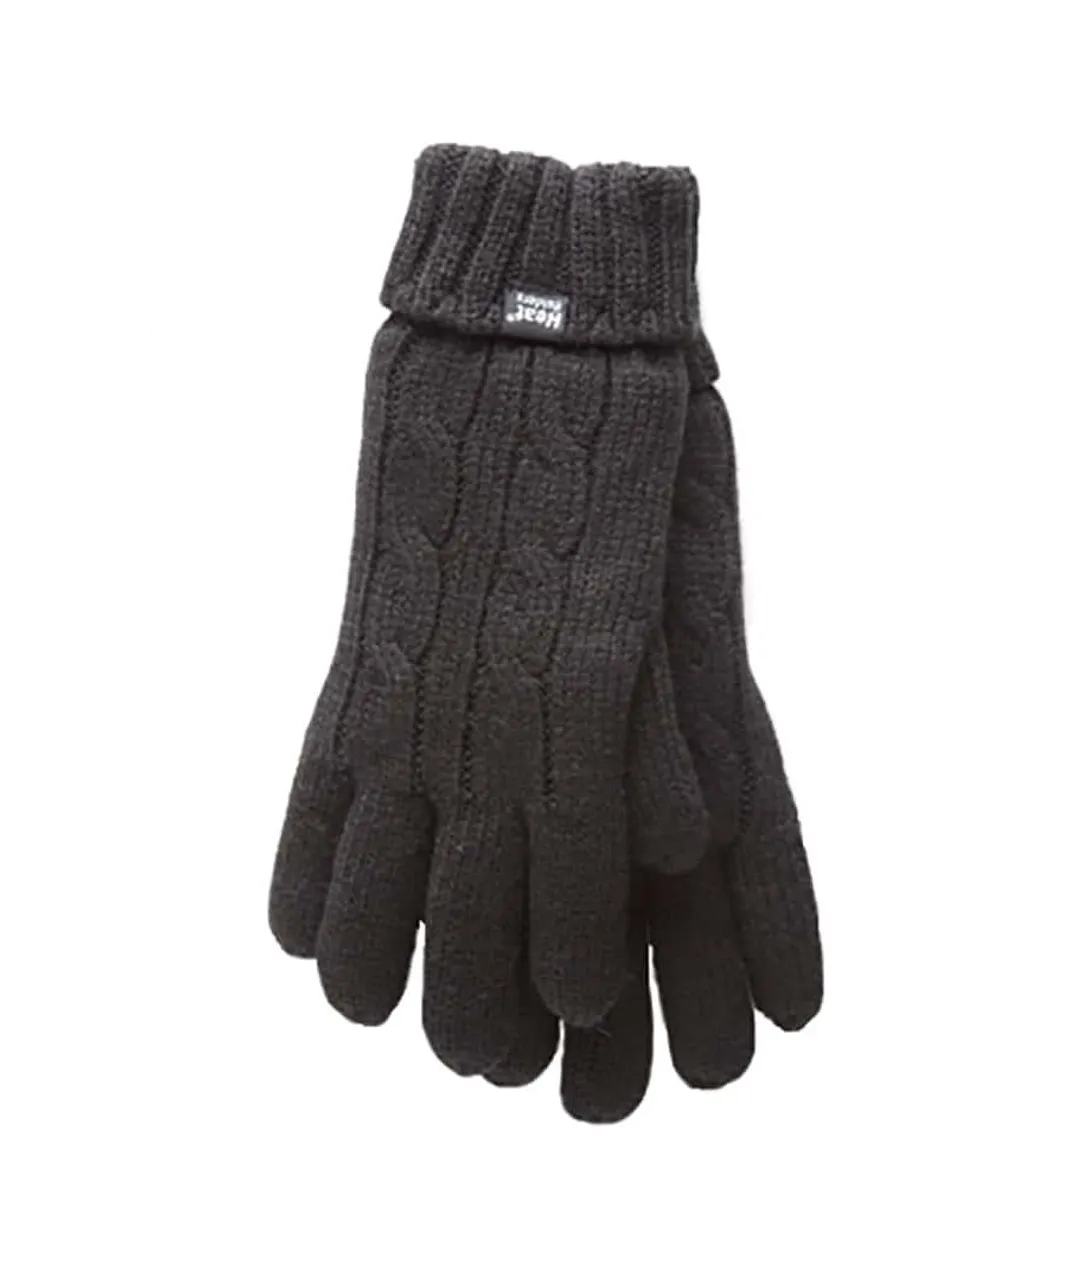 Heat Holders - Womens Cable Knit 2.3 tog Gloves for Winter - Black